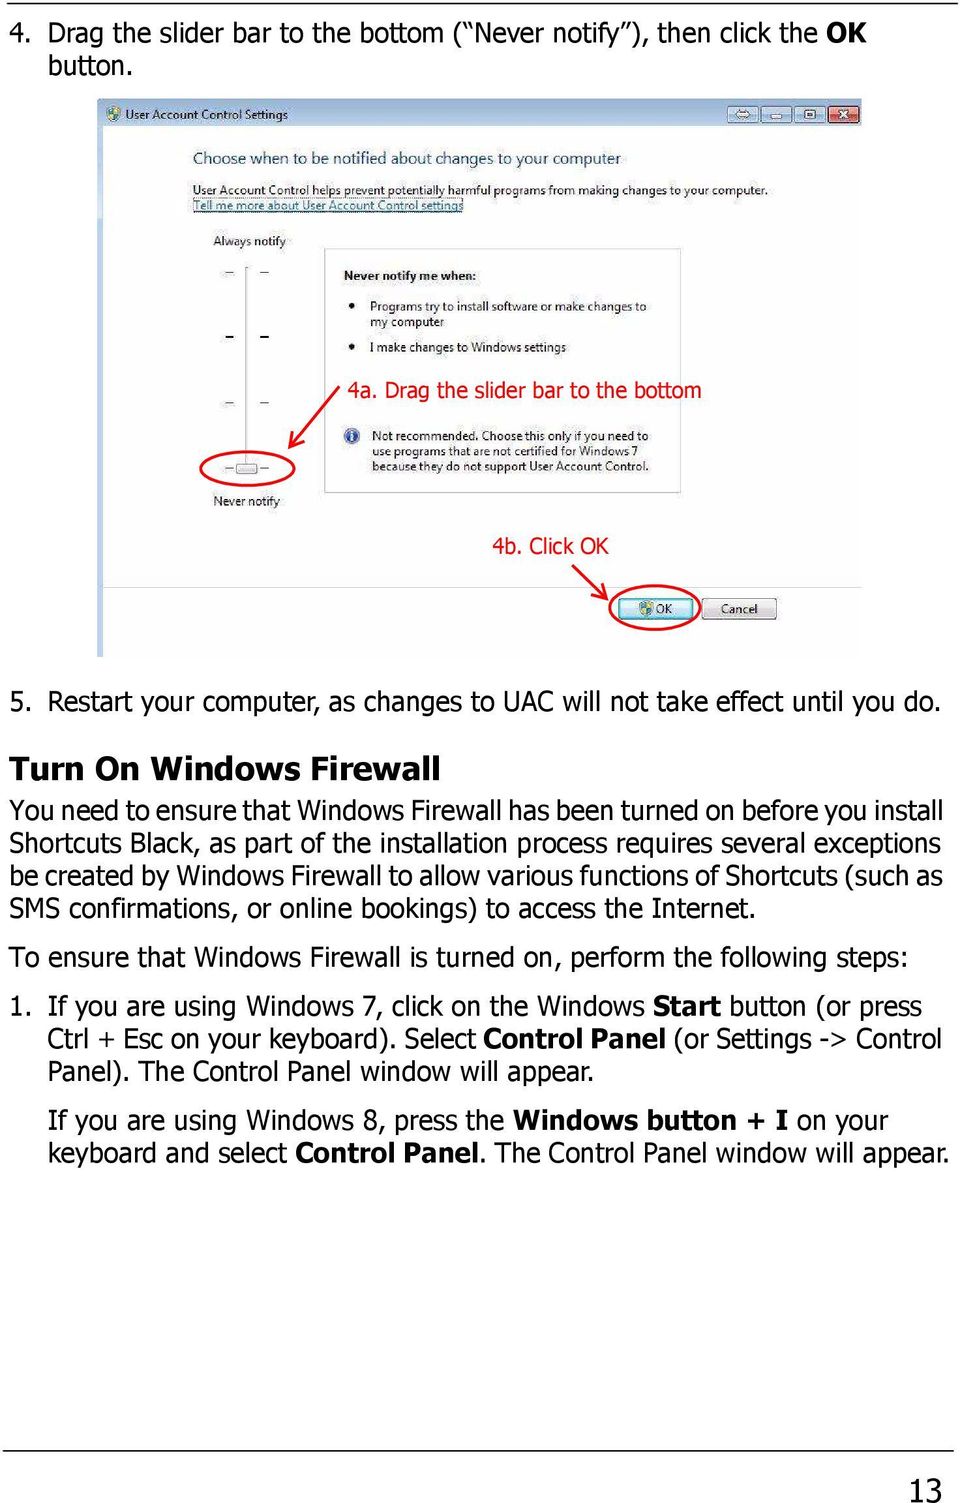 Turn On Windows Firewall You need to ensure that Windows Firewall has been turned on before you install Shortcuts Black, as part of the installation process requires several exceptions be created by